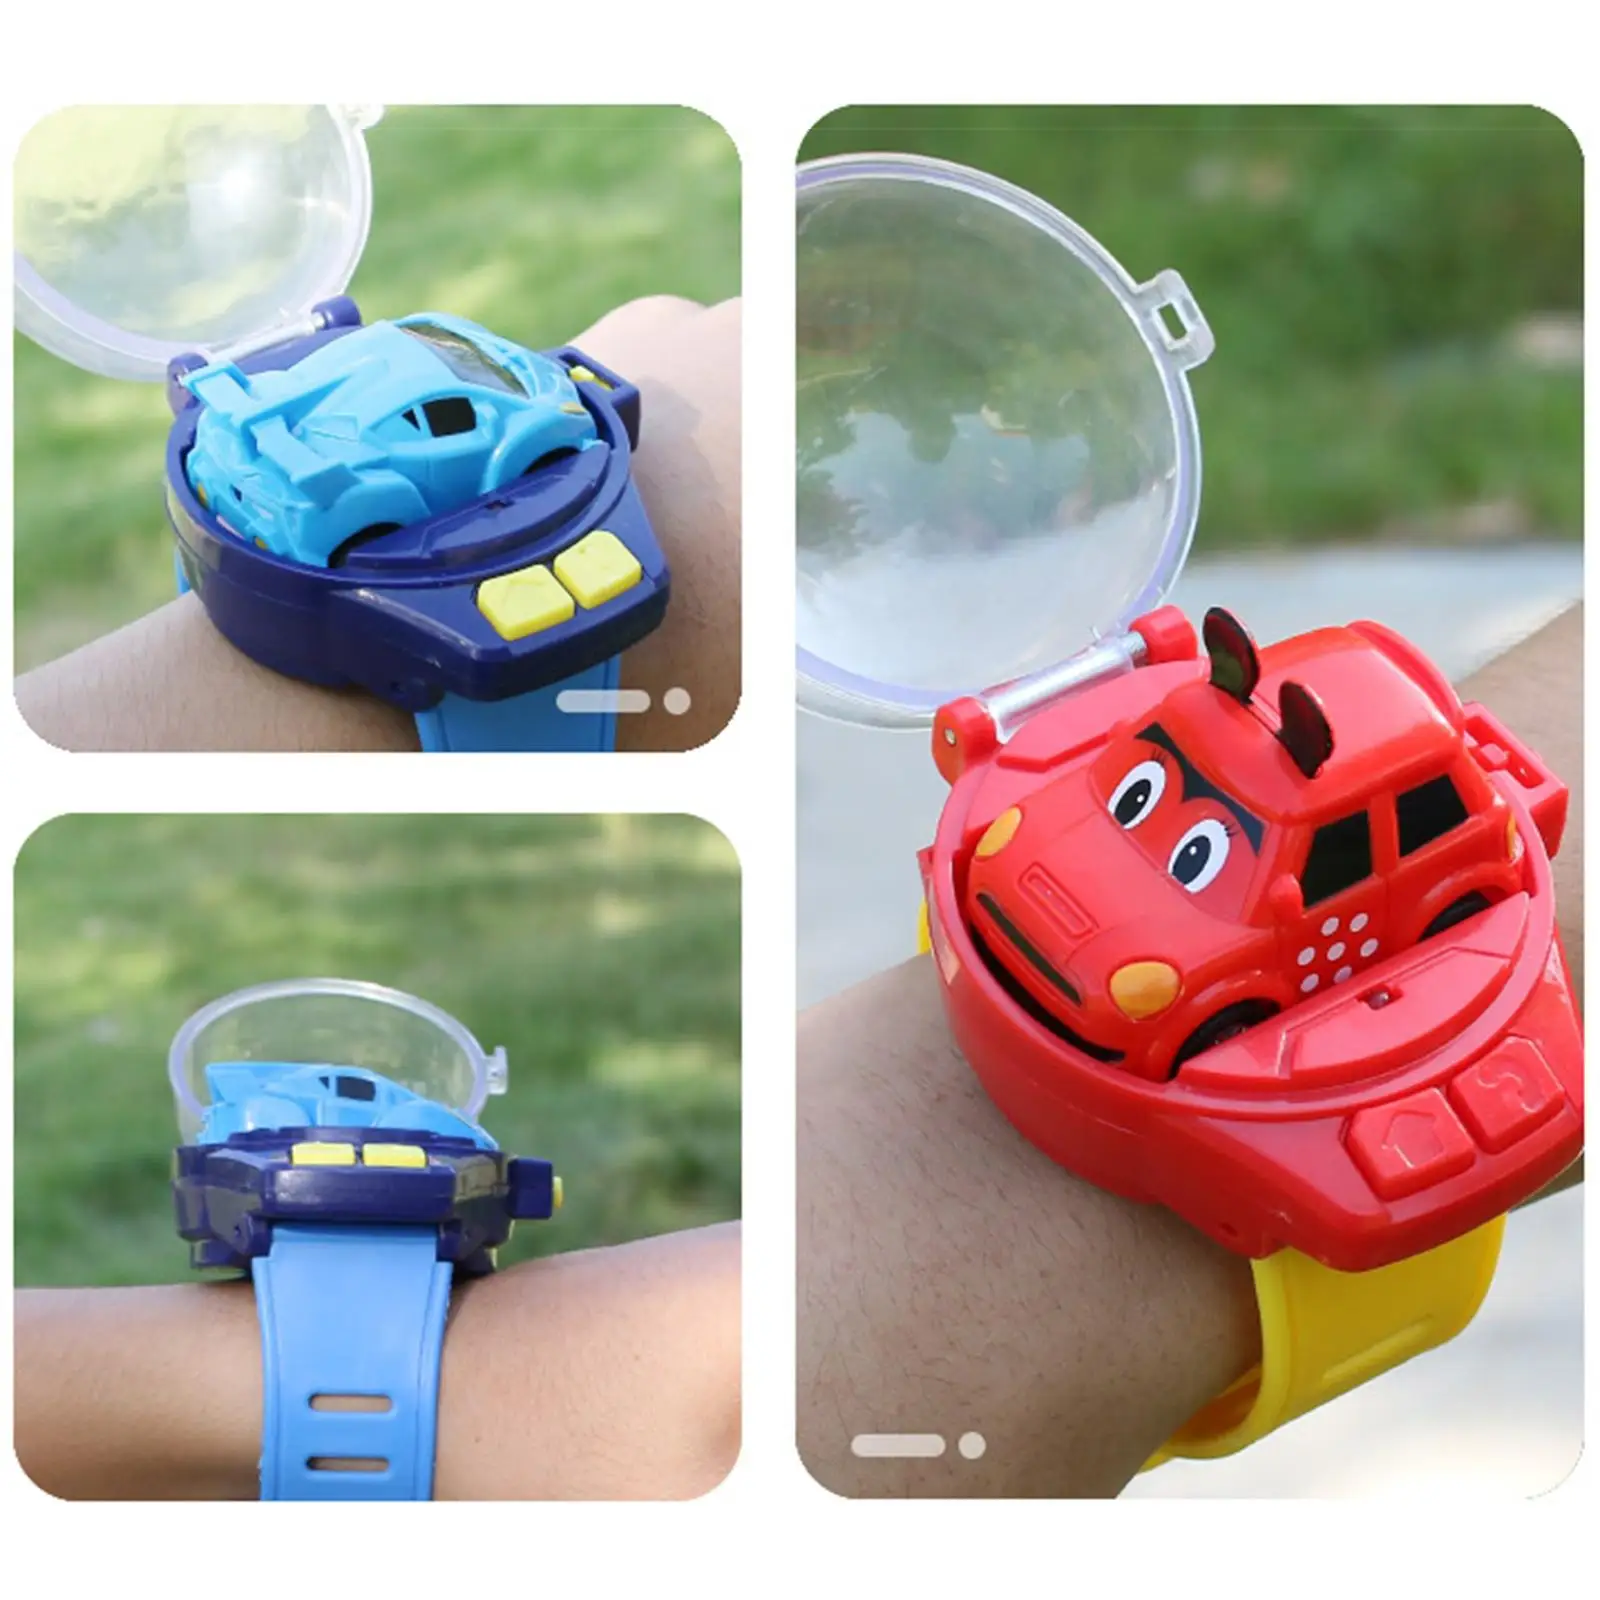 2022 New Mini Watch RC Car Remote Control Electric Wrist Infrared Sensing Racing Cars Watch For Boys Girls Gift